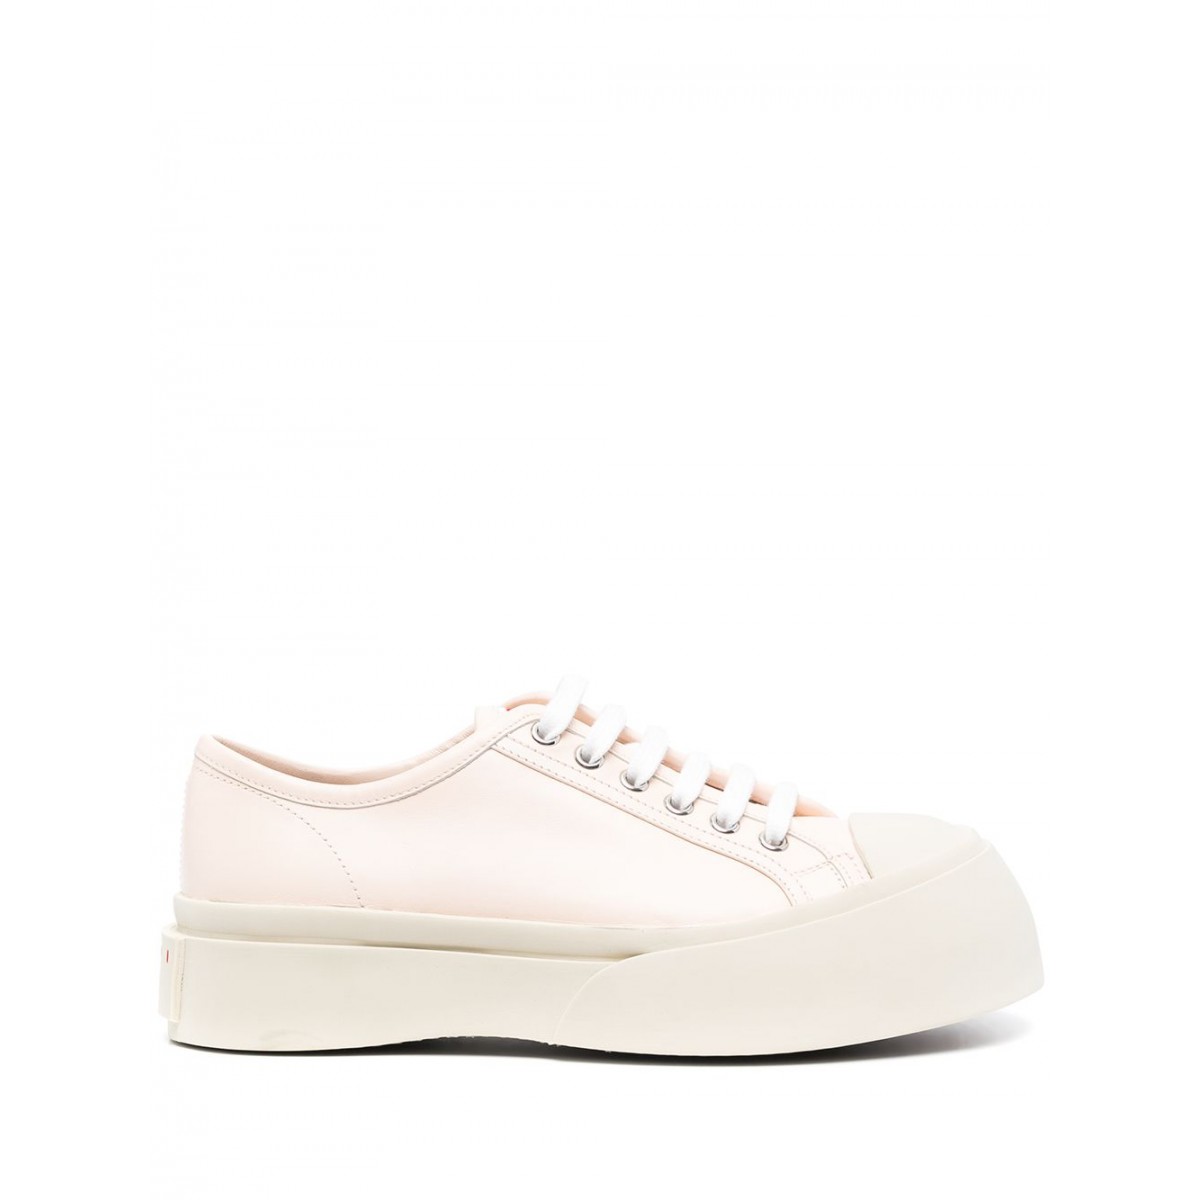 Marni Peony Calf Leather Lace Up Pablo Sneakers. 